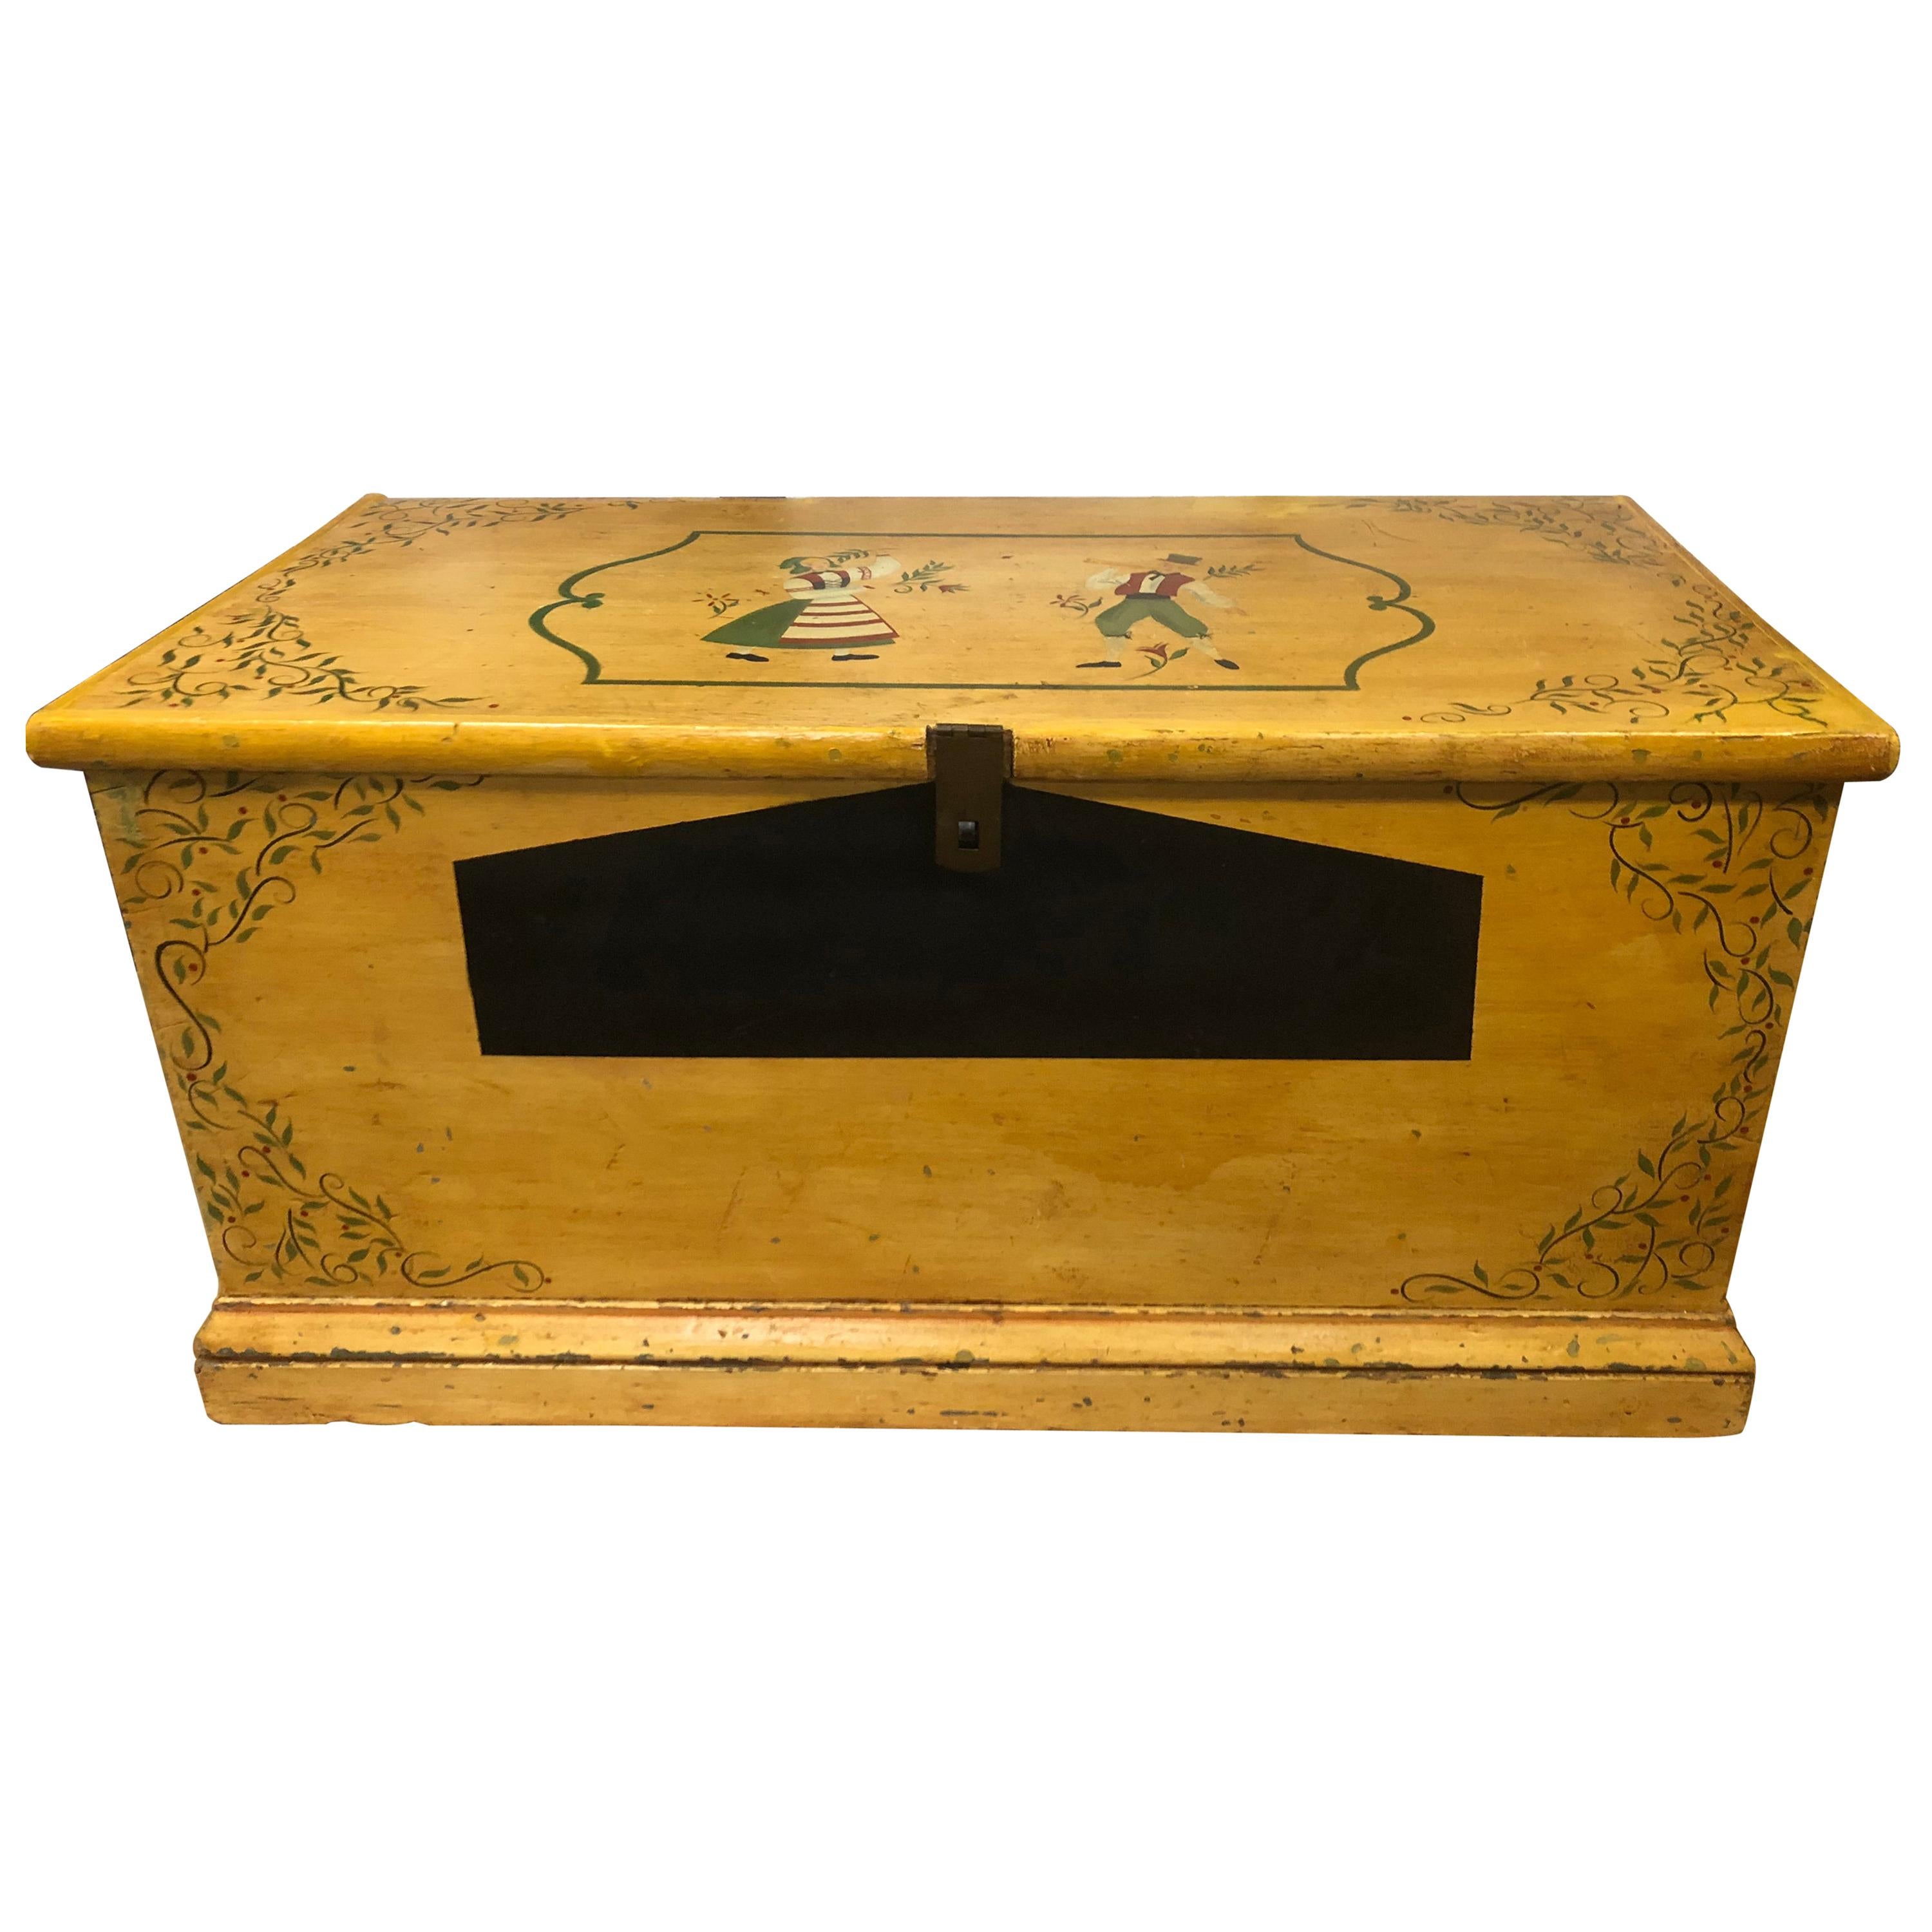 Delightful Antique Painted Hope Chest with Handpainted Dutch Figures